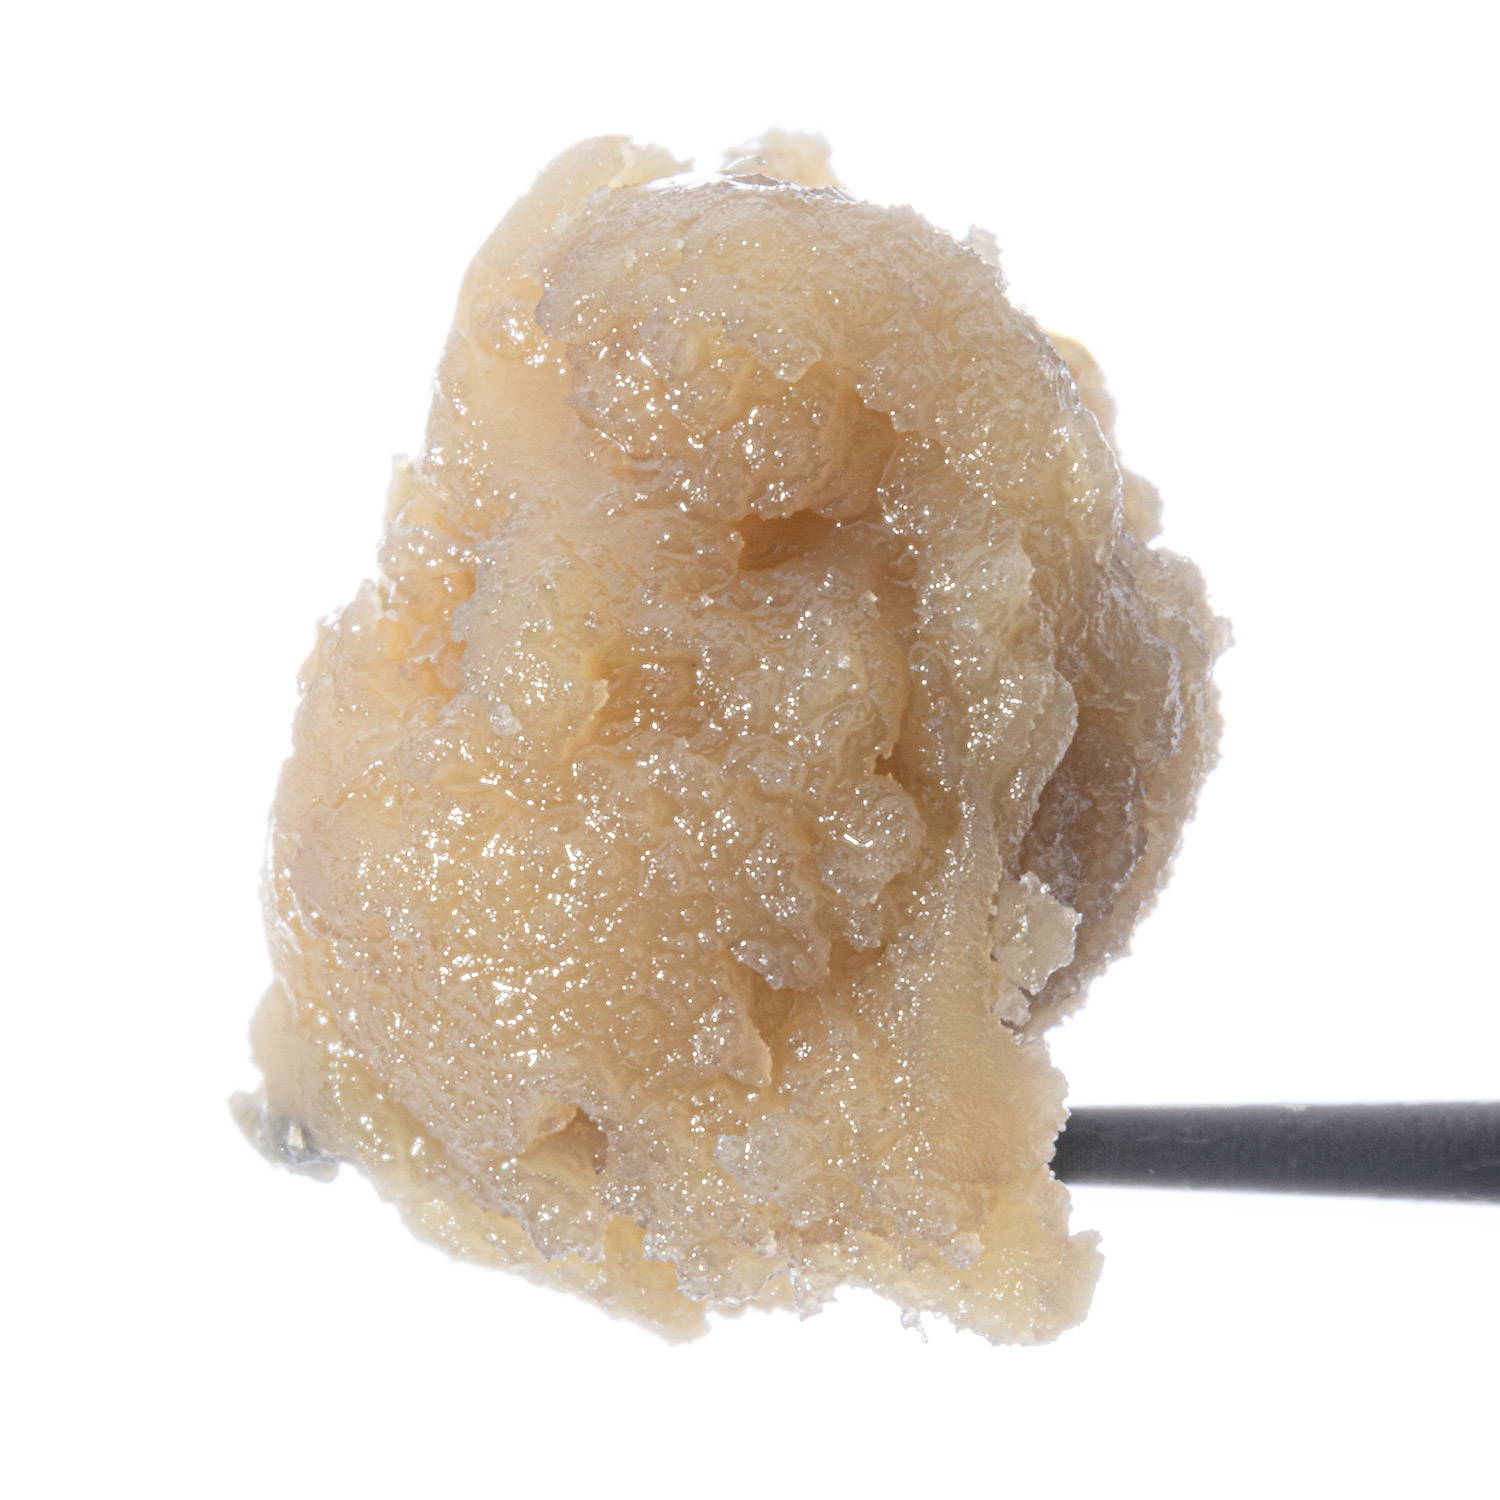 West Coast Cure Hash Rosin Review - An Underrated Selection Of Live Resin